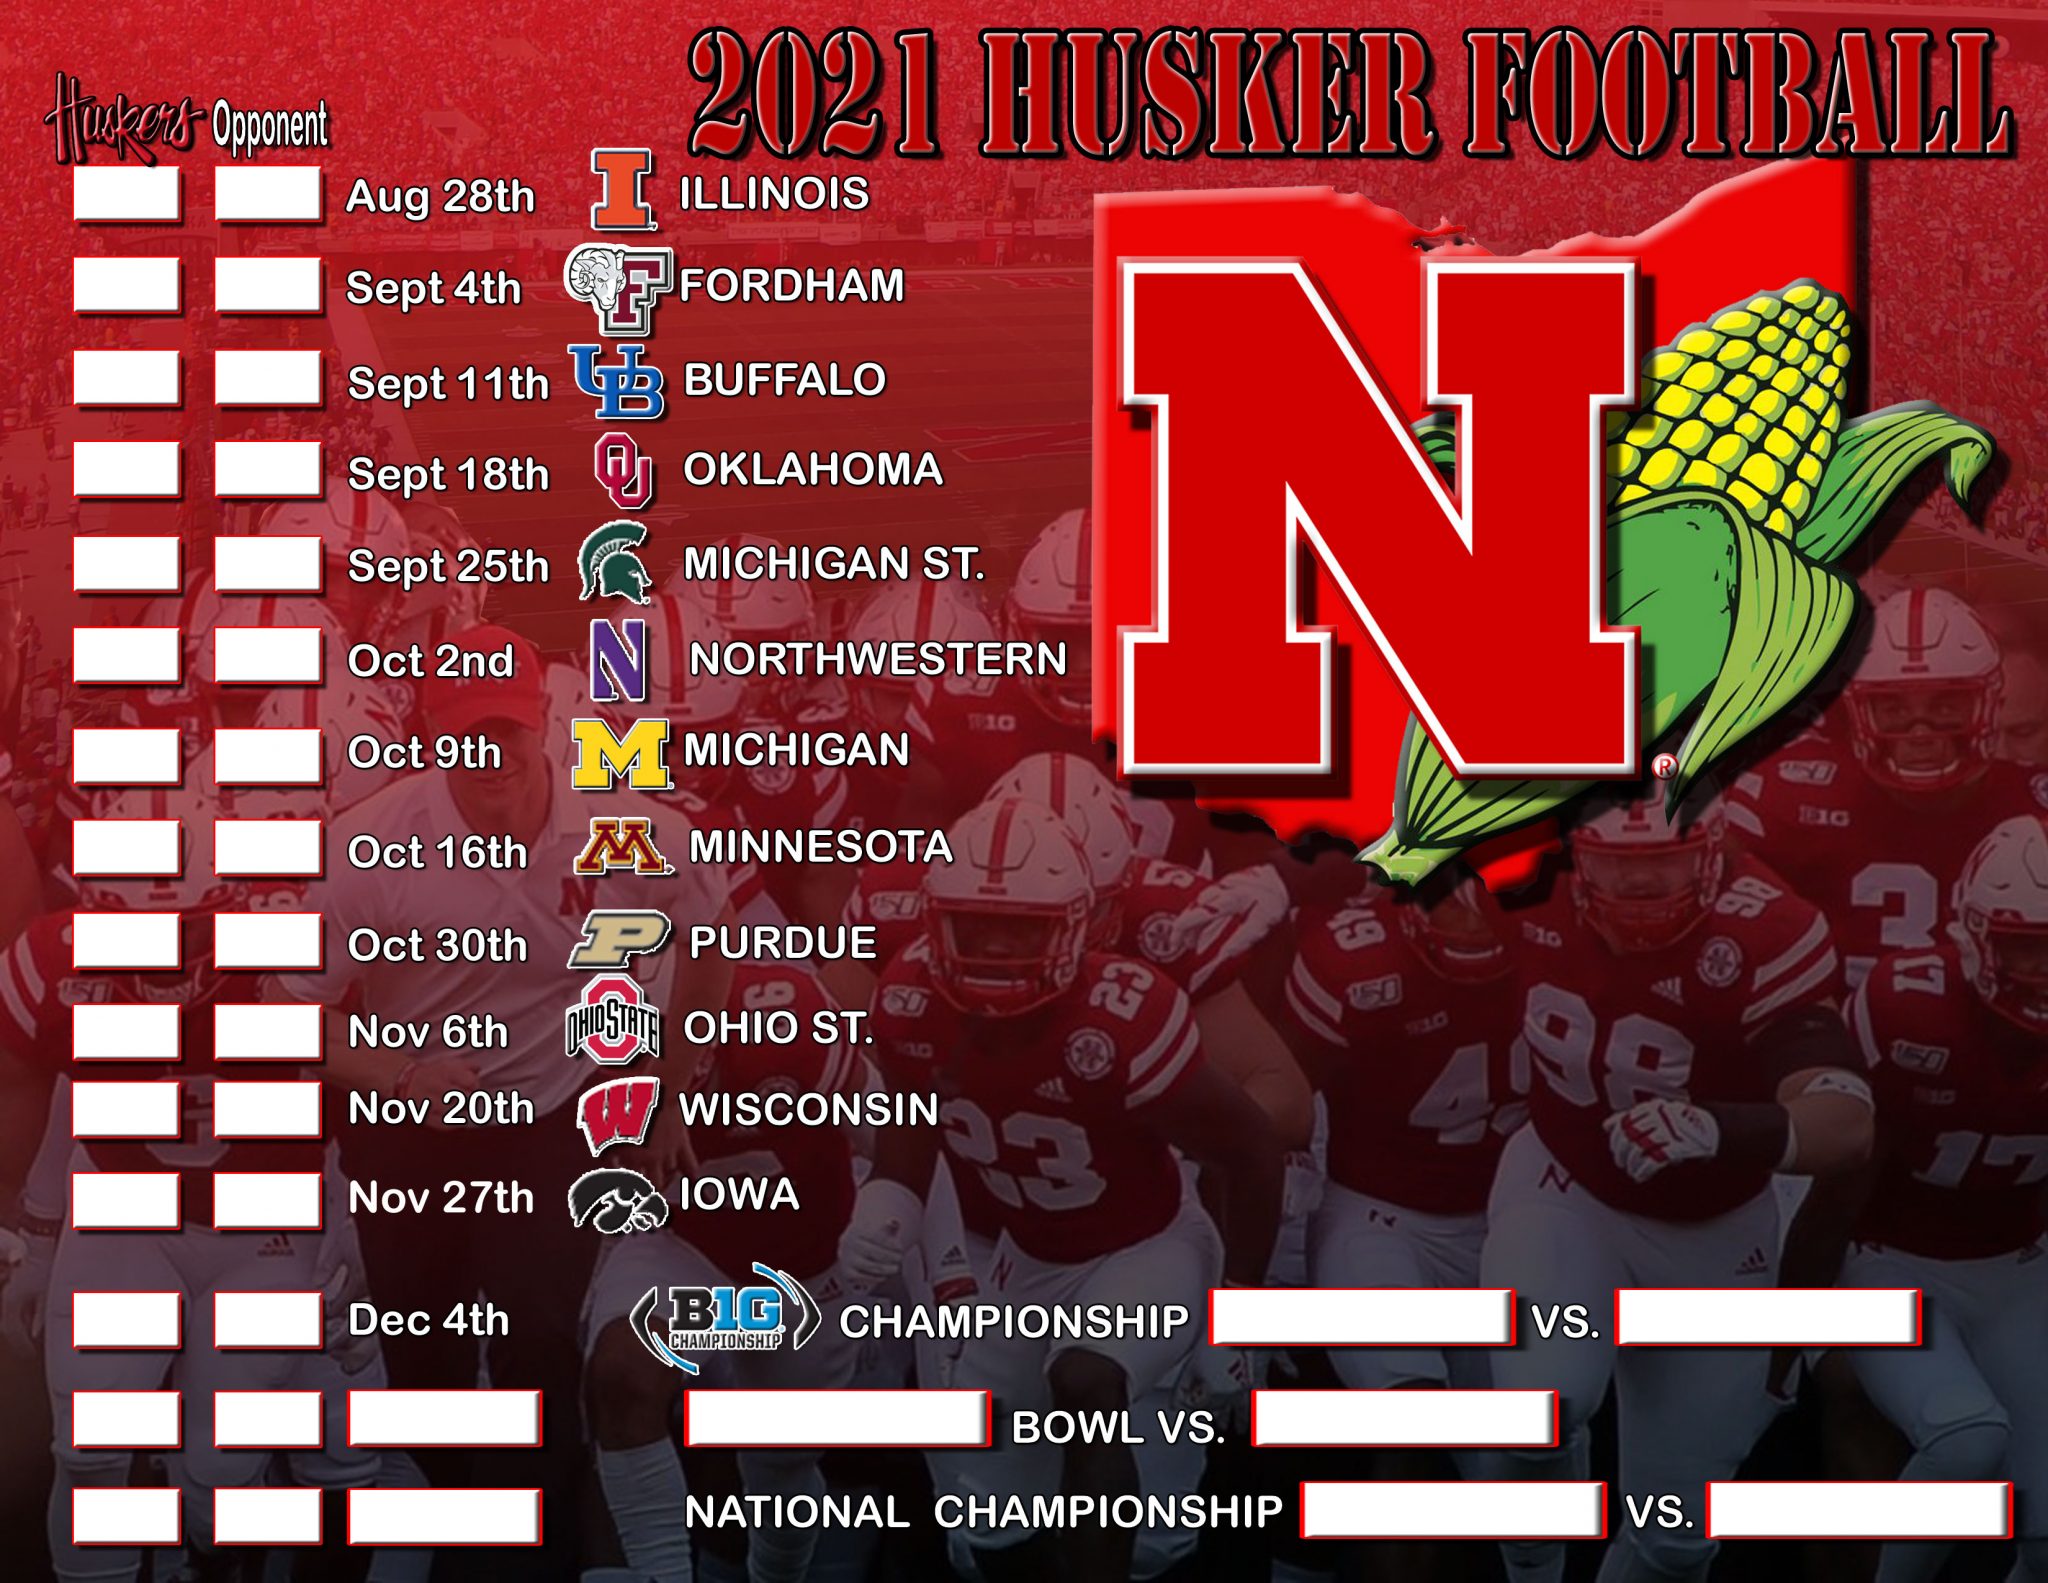 A few changes to the schedule Huskers In Ohio